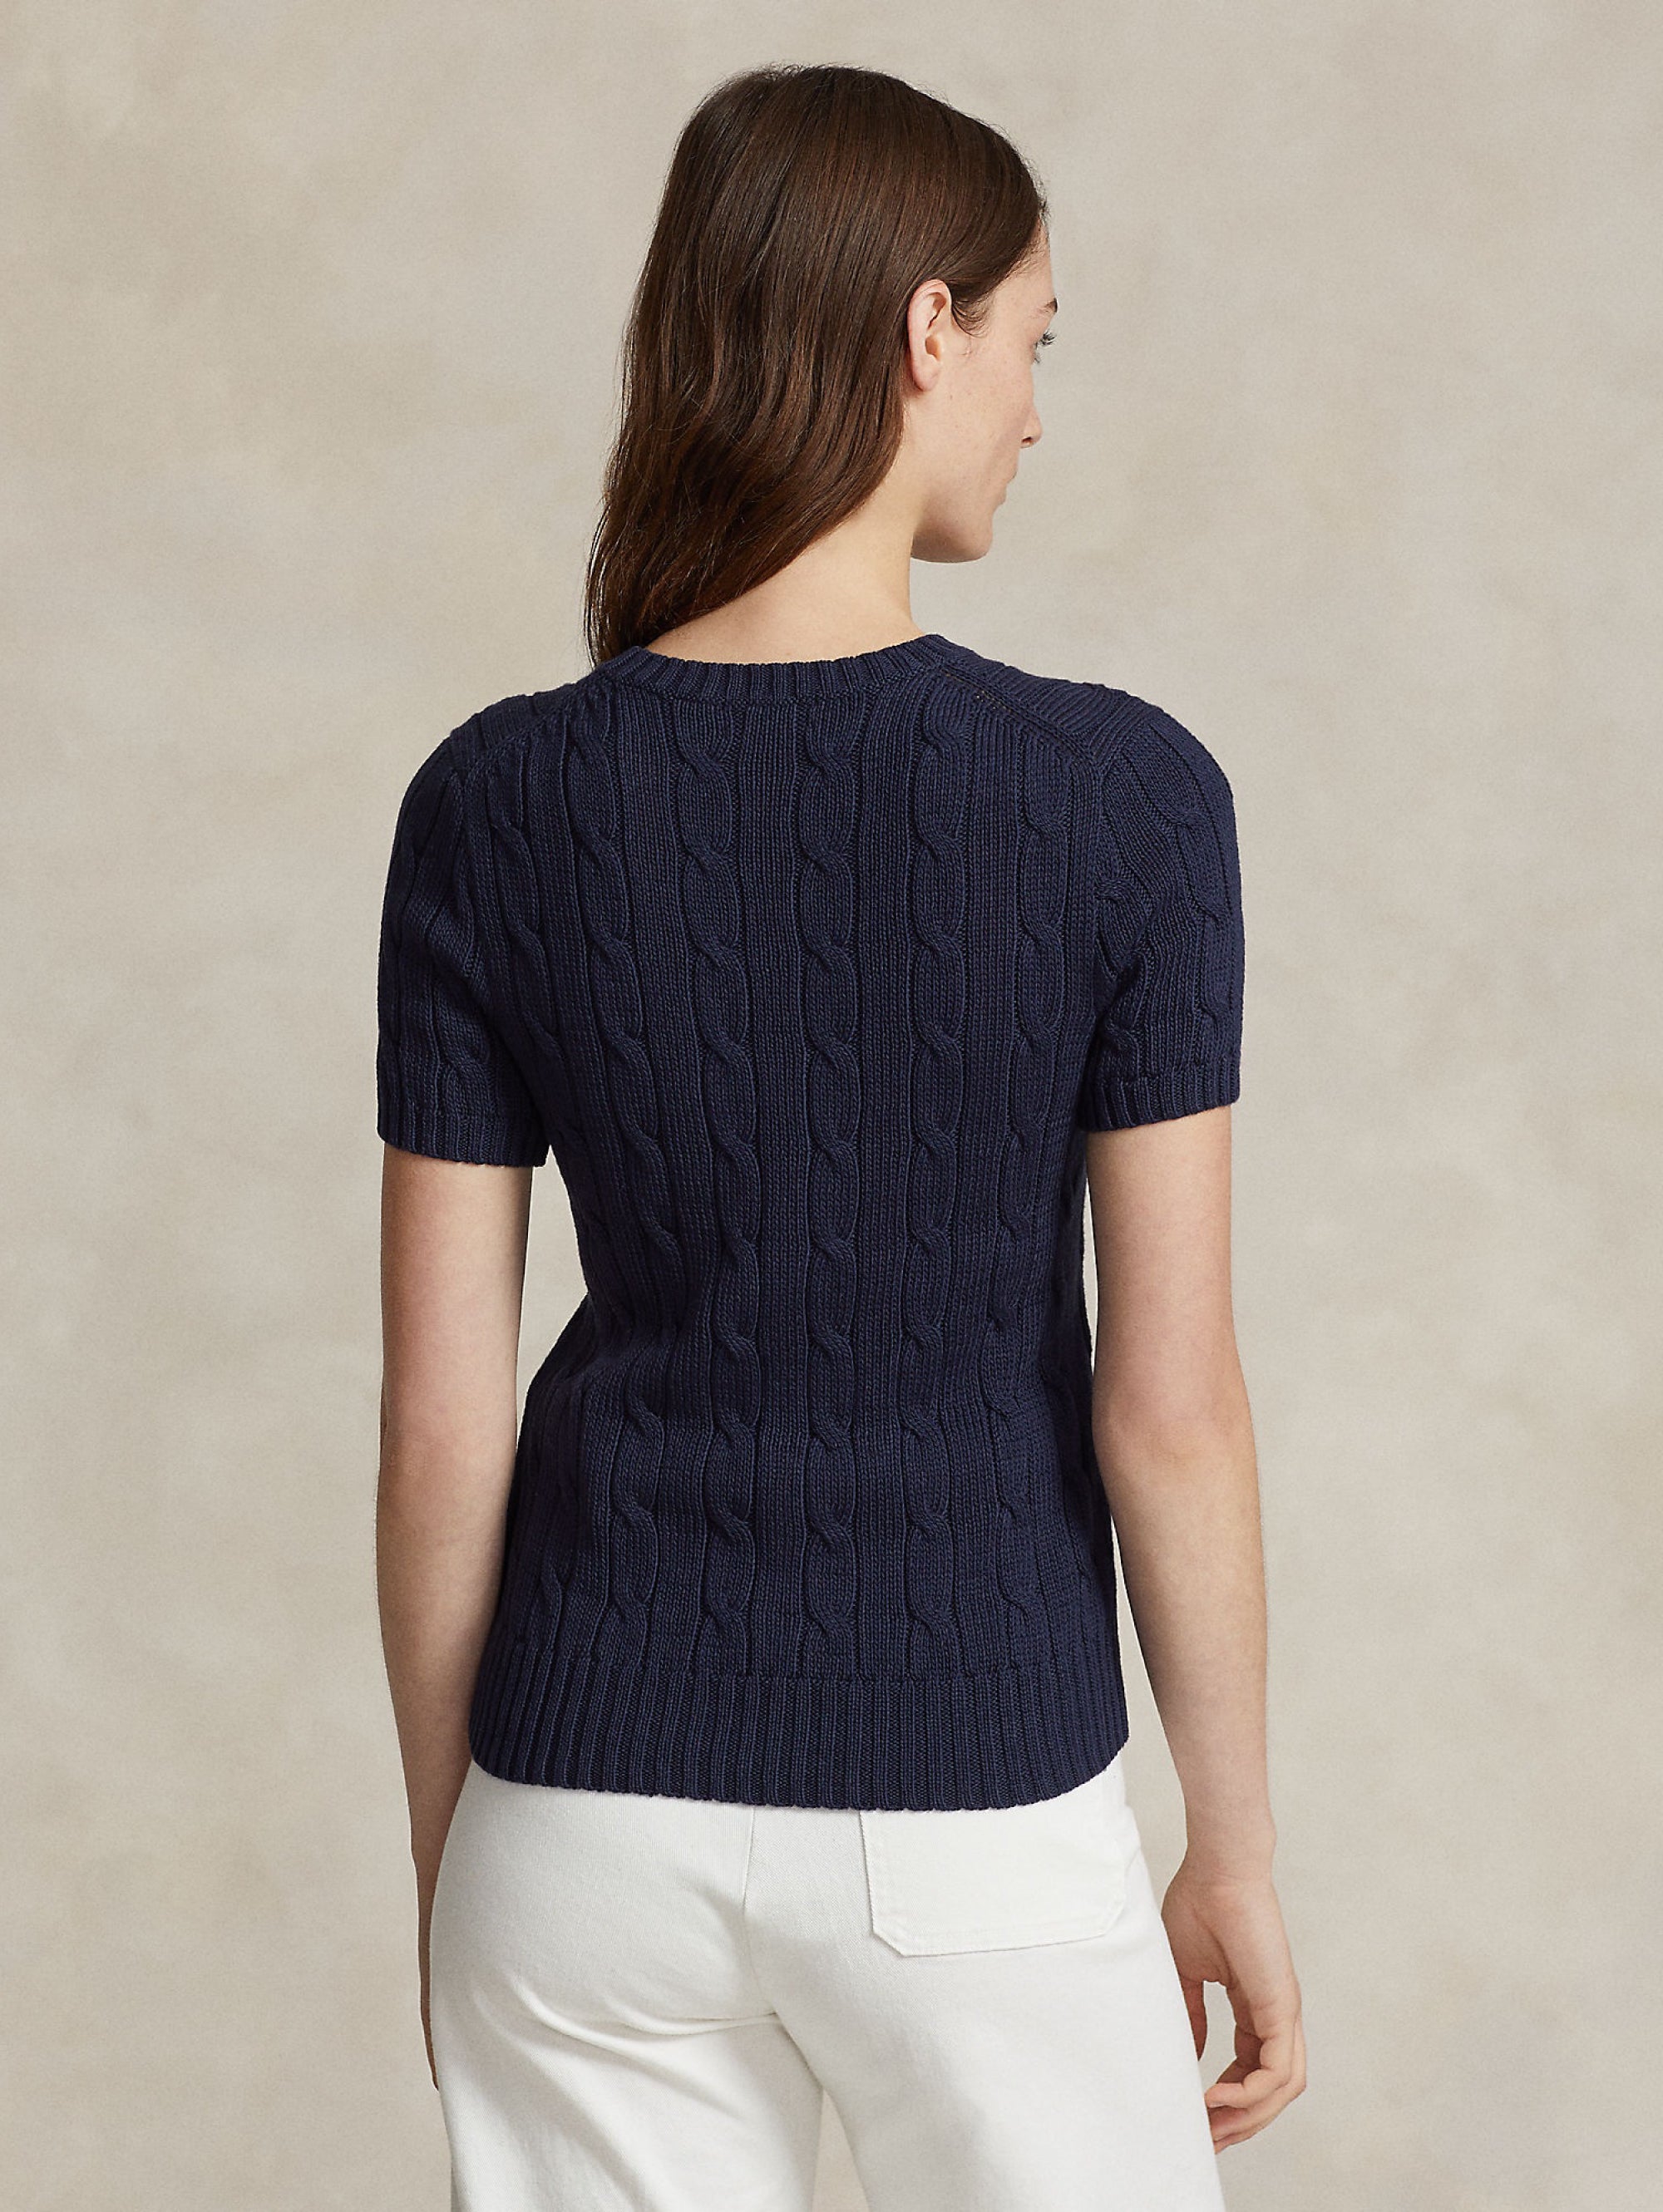 Blue Cable Sweater with Short Sleeves